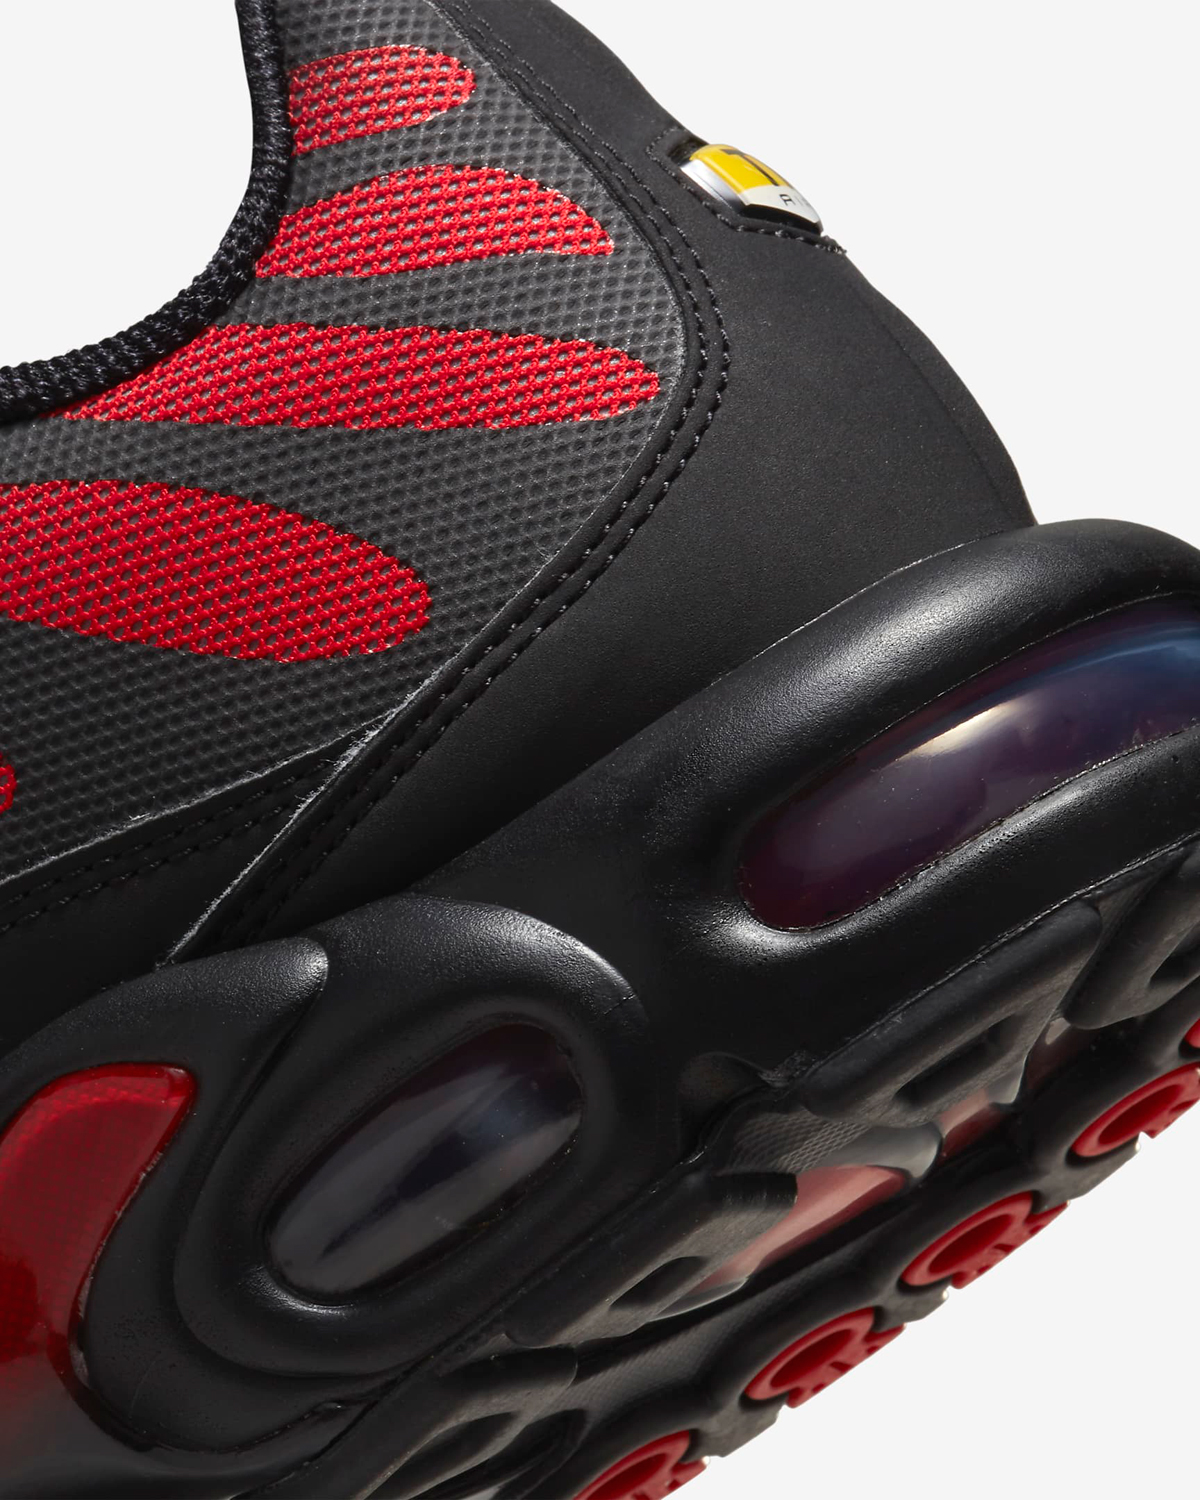 nike-air-max-plus-bred-university-red-black-release-date-8